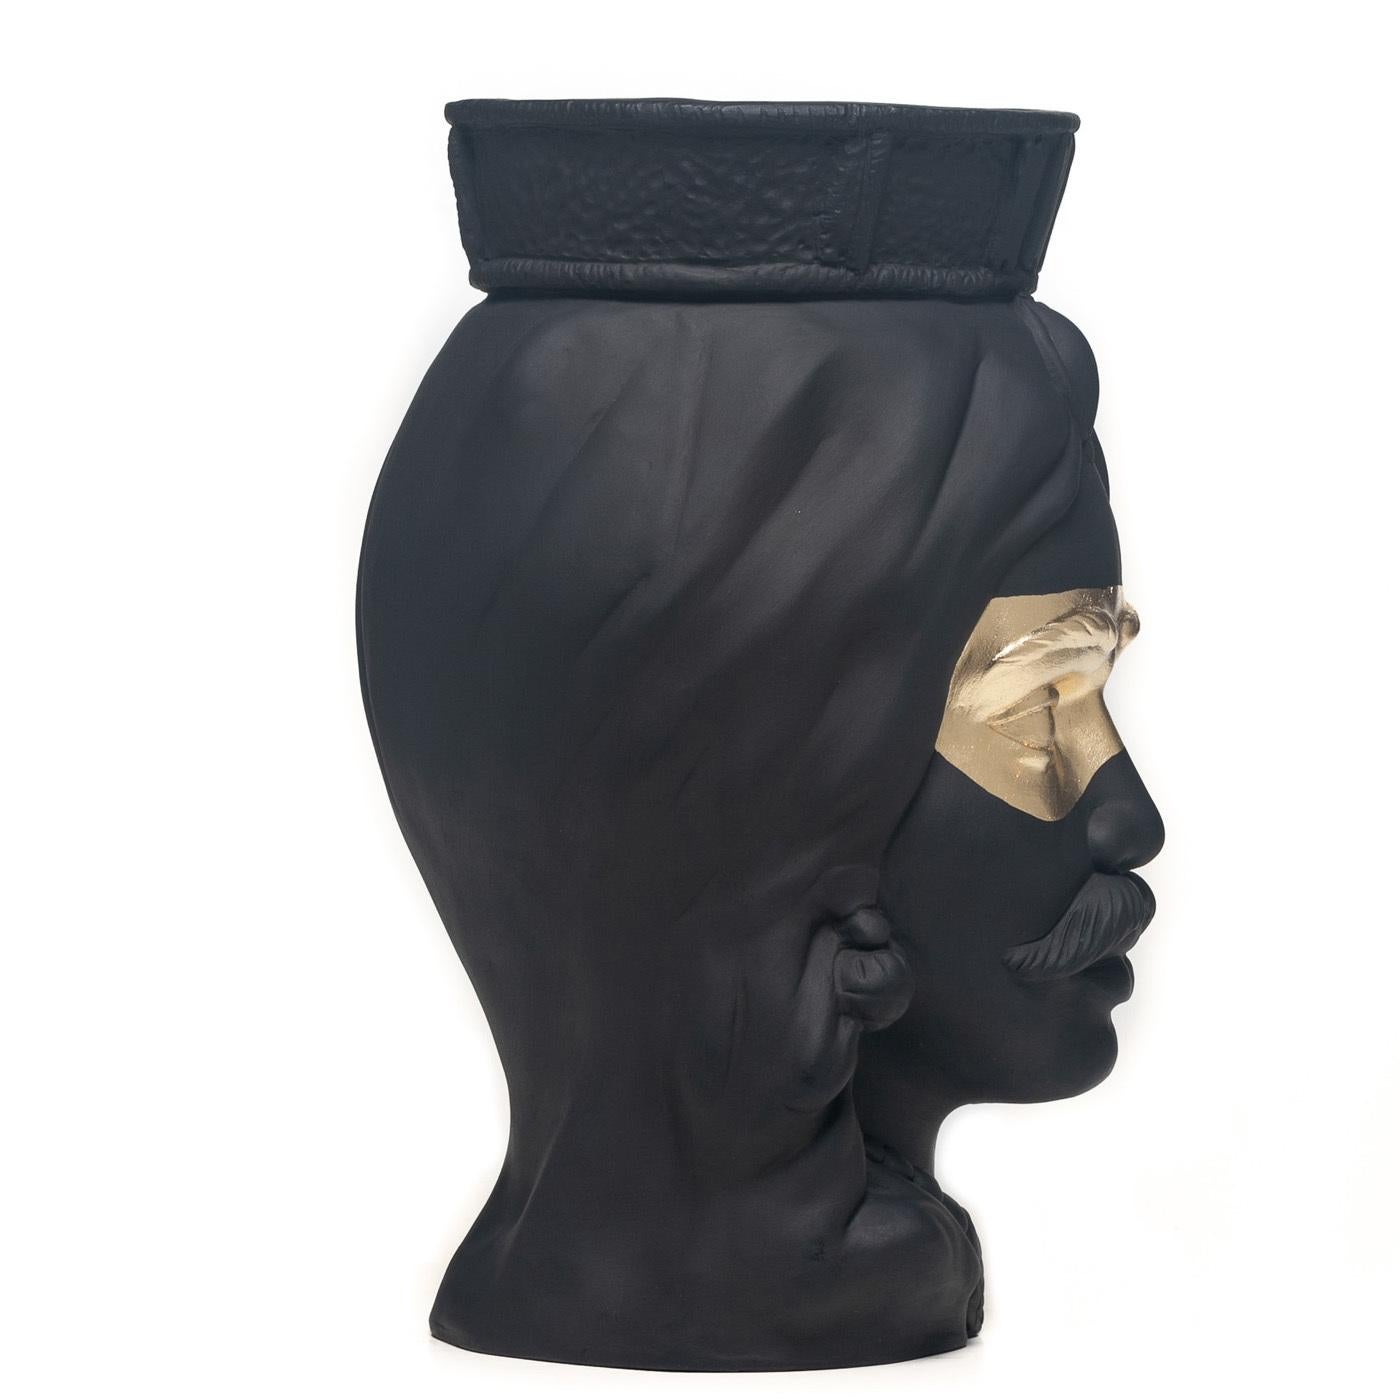 Timeless and stately, this versatile vase of a Sicilian nobleman will be a refined statement piece in a garden, patio, or kitchen decor. Fashioned of terracotta, this piece is marked by a striking countenance: a sinuously draped turban topped by a